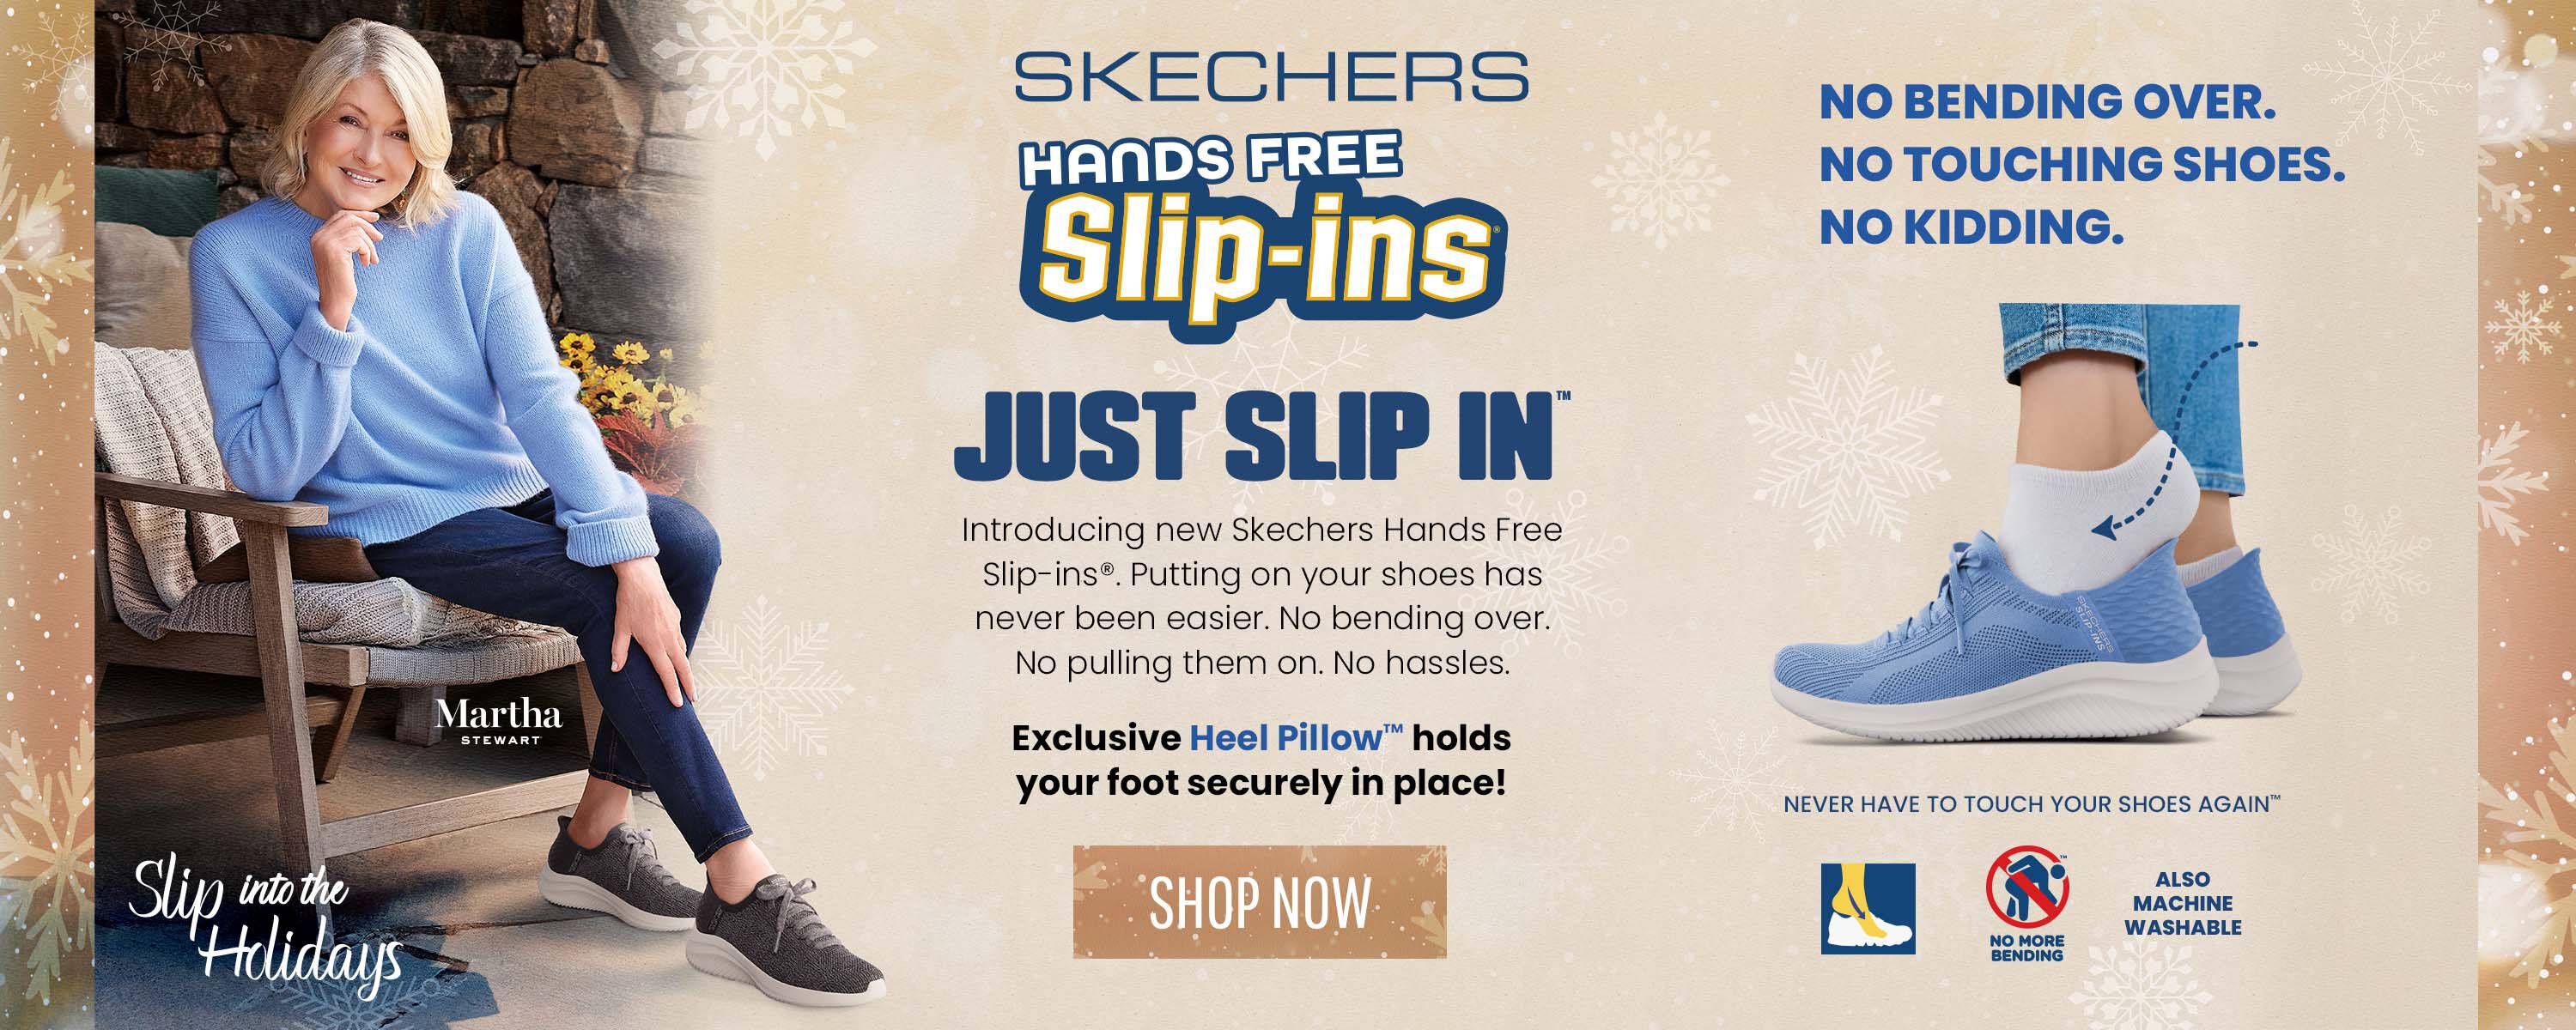 Step into Style with SKECHERS Performance Go Flex 2 Slip-On Shoes